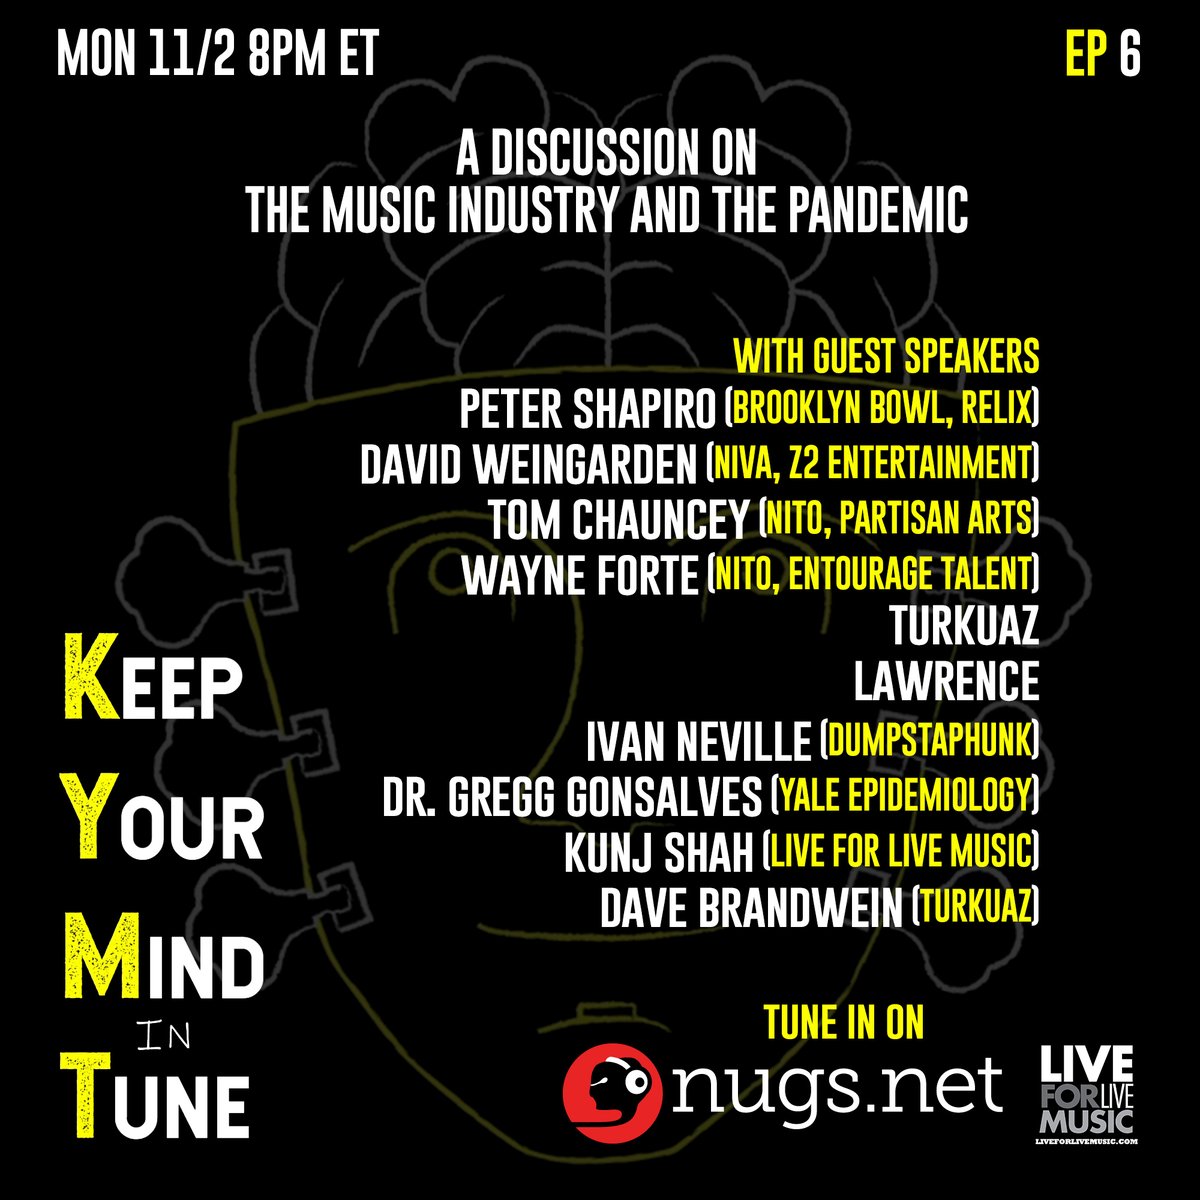 Join us at 8 ET for a pre-election special on the music industry and the pandemic, featuring guests Peter Shapiro, reps from @nivassoc & @NITO_Live, @IvanNeville, Dr. @gregggonsalves (Yale), @Turkuaz, @lawrencetheband, and hosts @KunjShah87 (@L4LM) & @DaveBrandwein (Turkuaz).